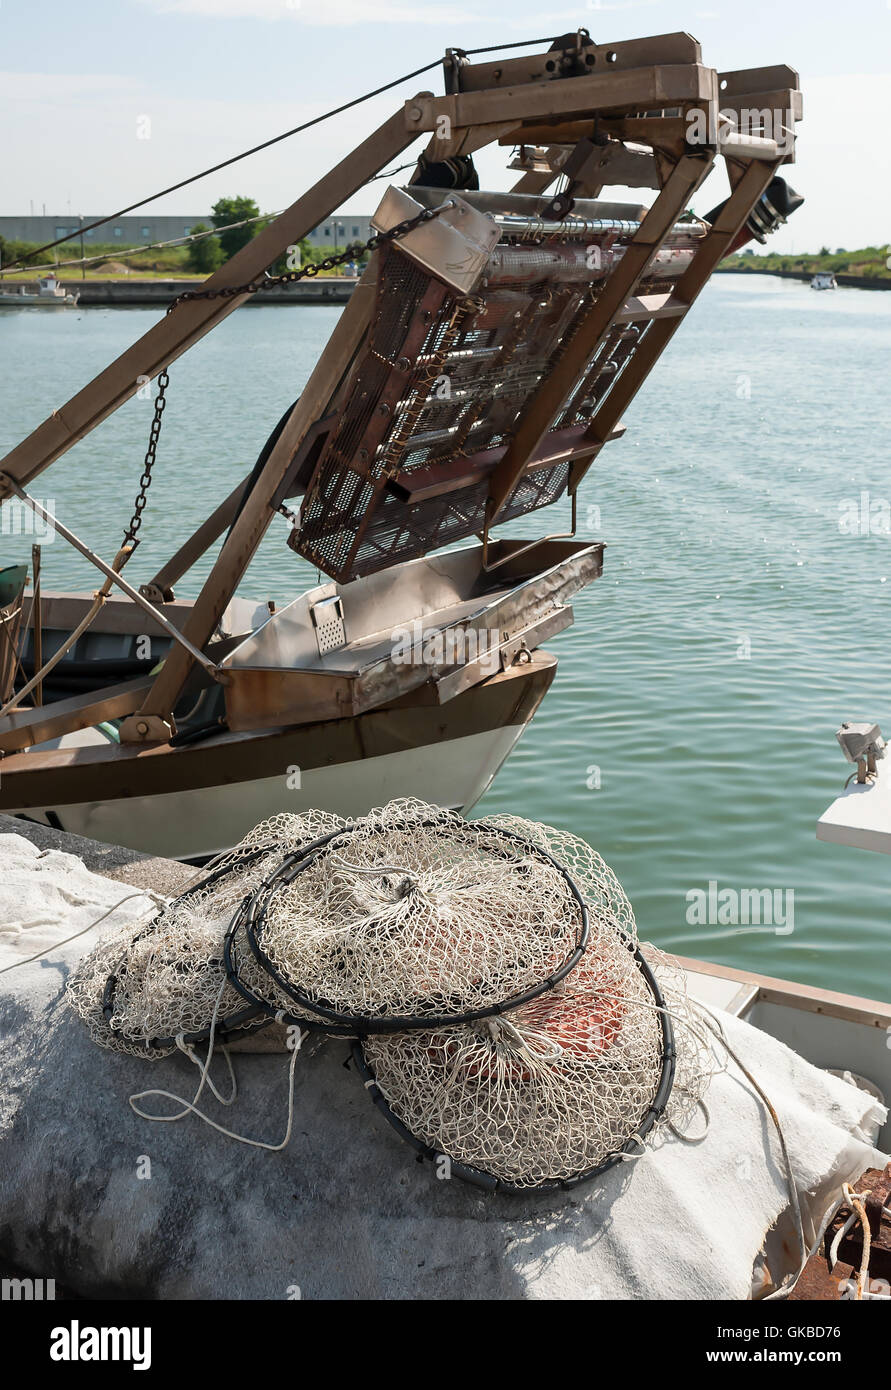 Pot made of nylon net with more rooms suitable for fishing in the lagoon to dry on the pier. Stock Photo